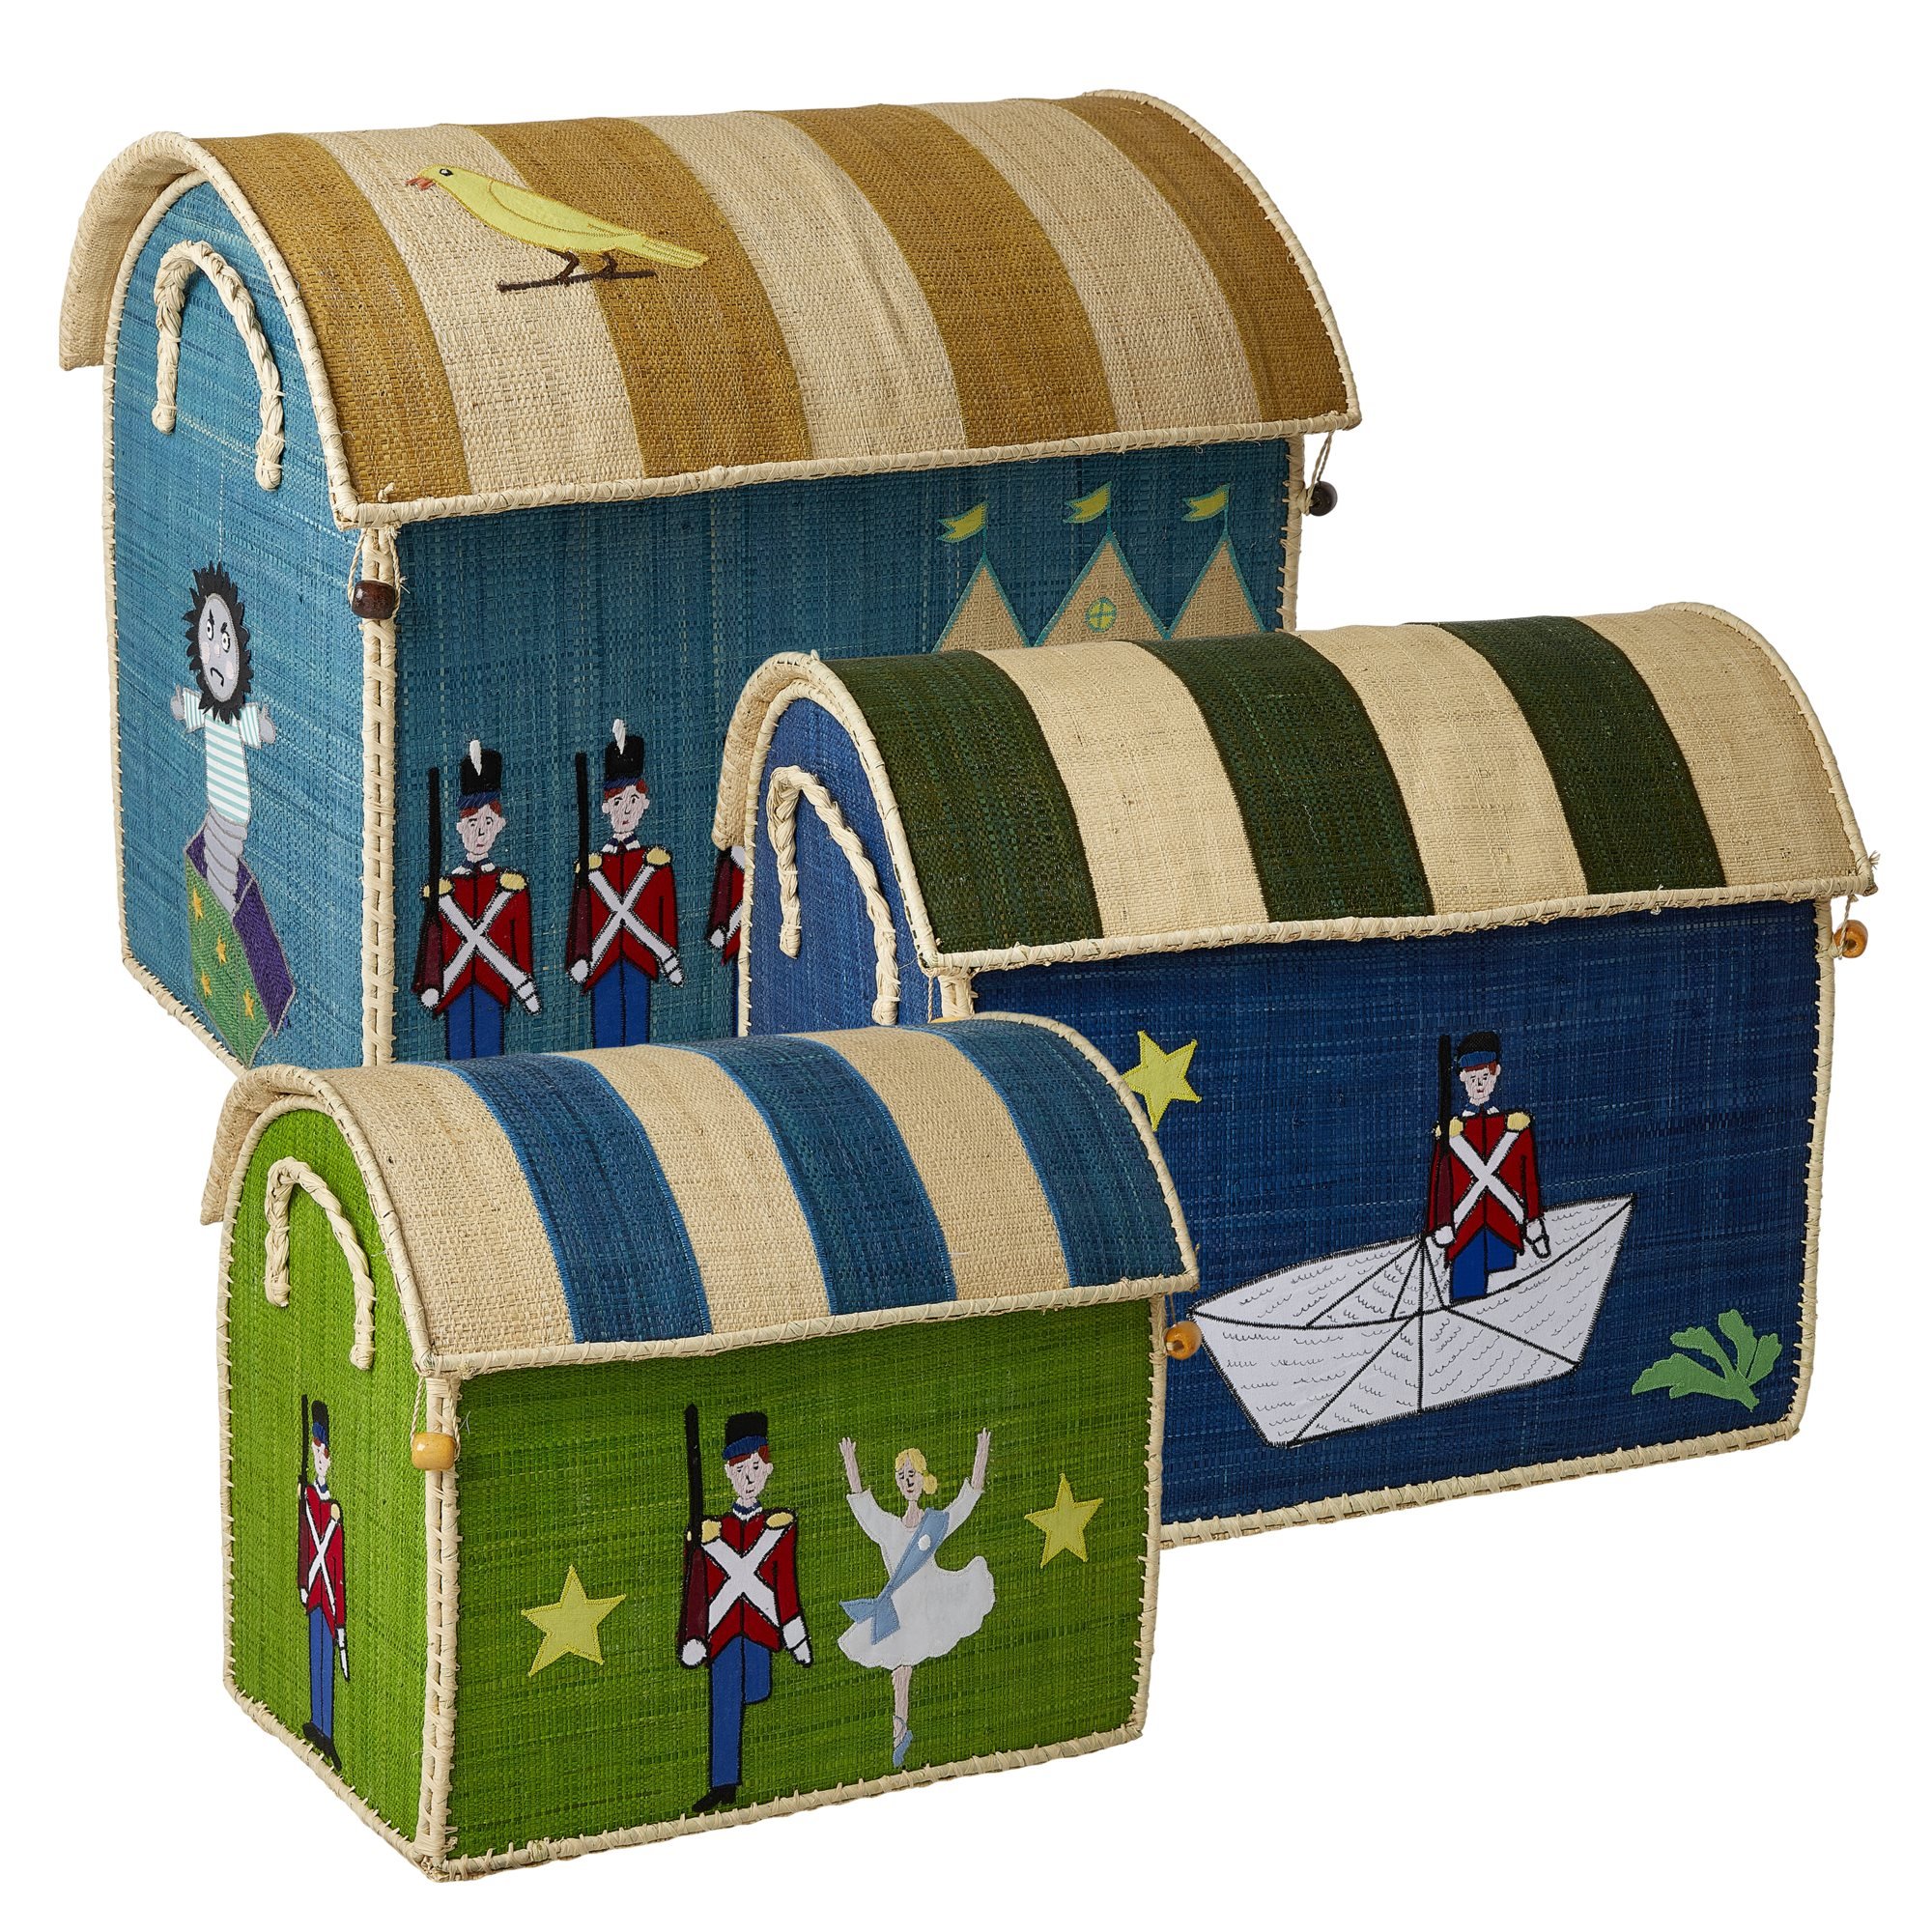 Rice - Large Set of 3 Toy Baskets with Tin Soldier Theme